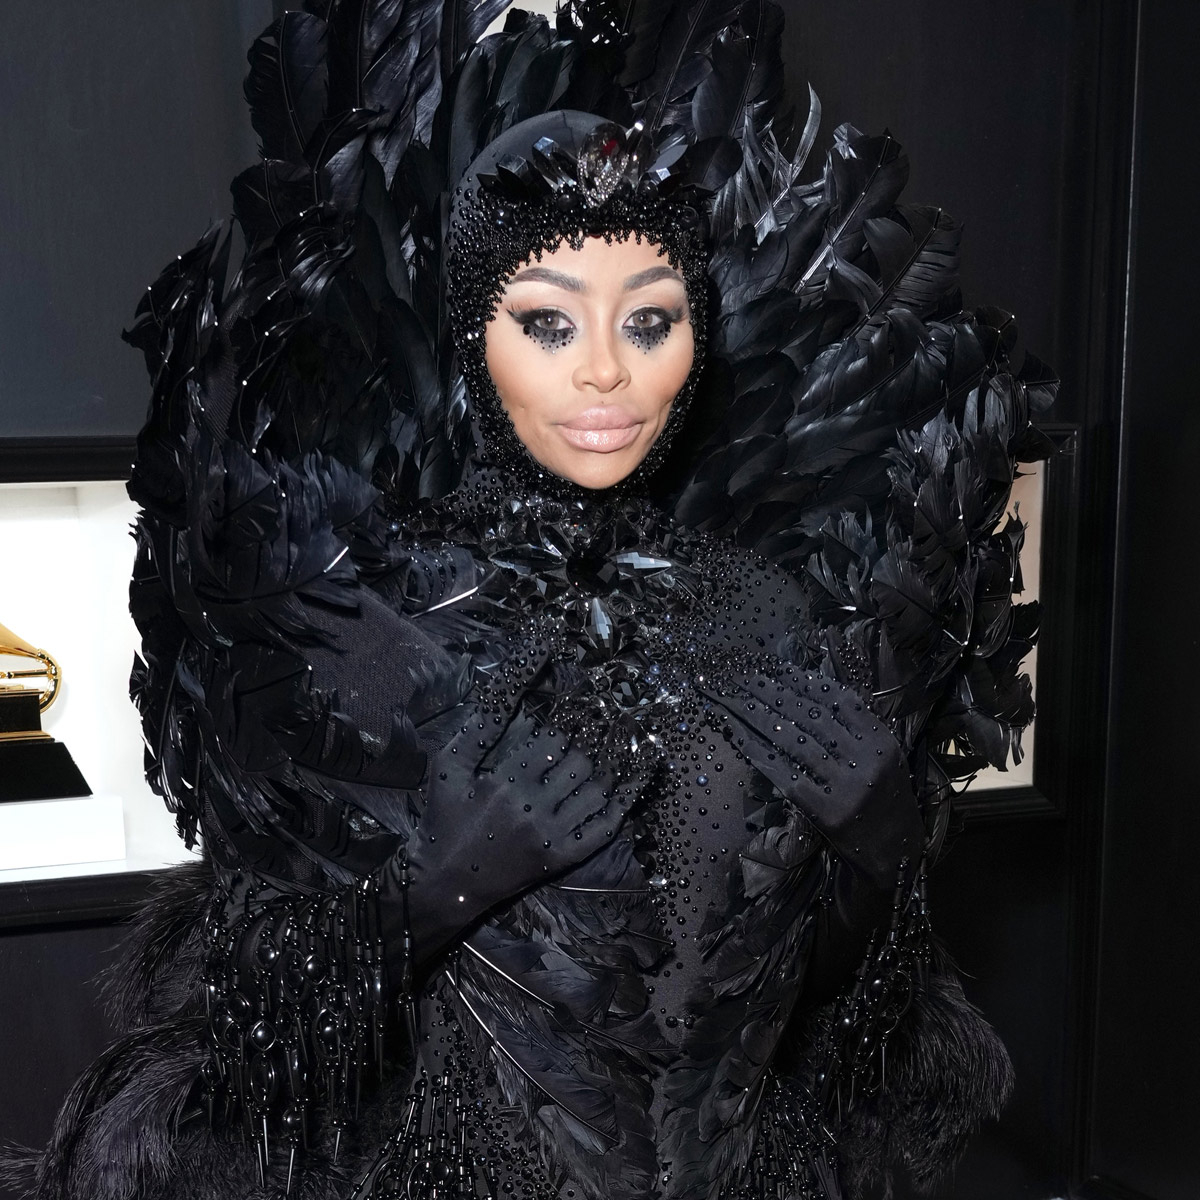 Blac Chyna Goes Pantsless in Extravagant Gothic Look at 2023 Grammys